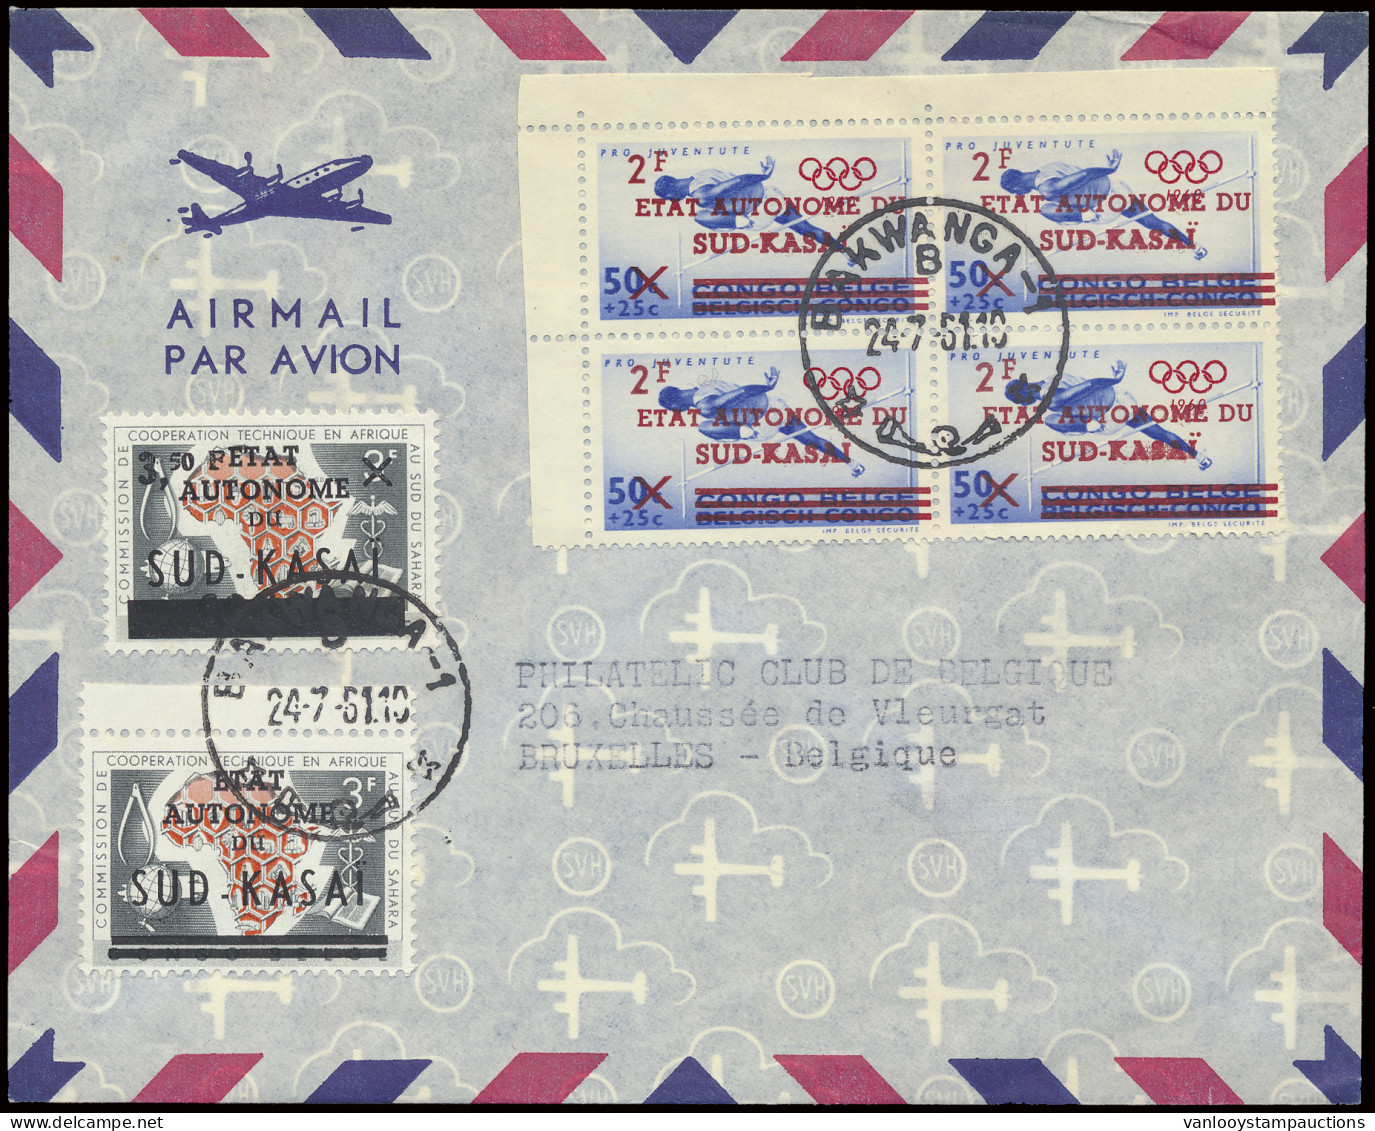 1961 Philatelic Club De Belgique Cover Franked With OBP N° 14/15 And 18 (bloc Of 4 With Corner Of Sheet) 3,50Fr. On 3Fr  - South-Kasaï